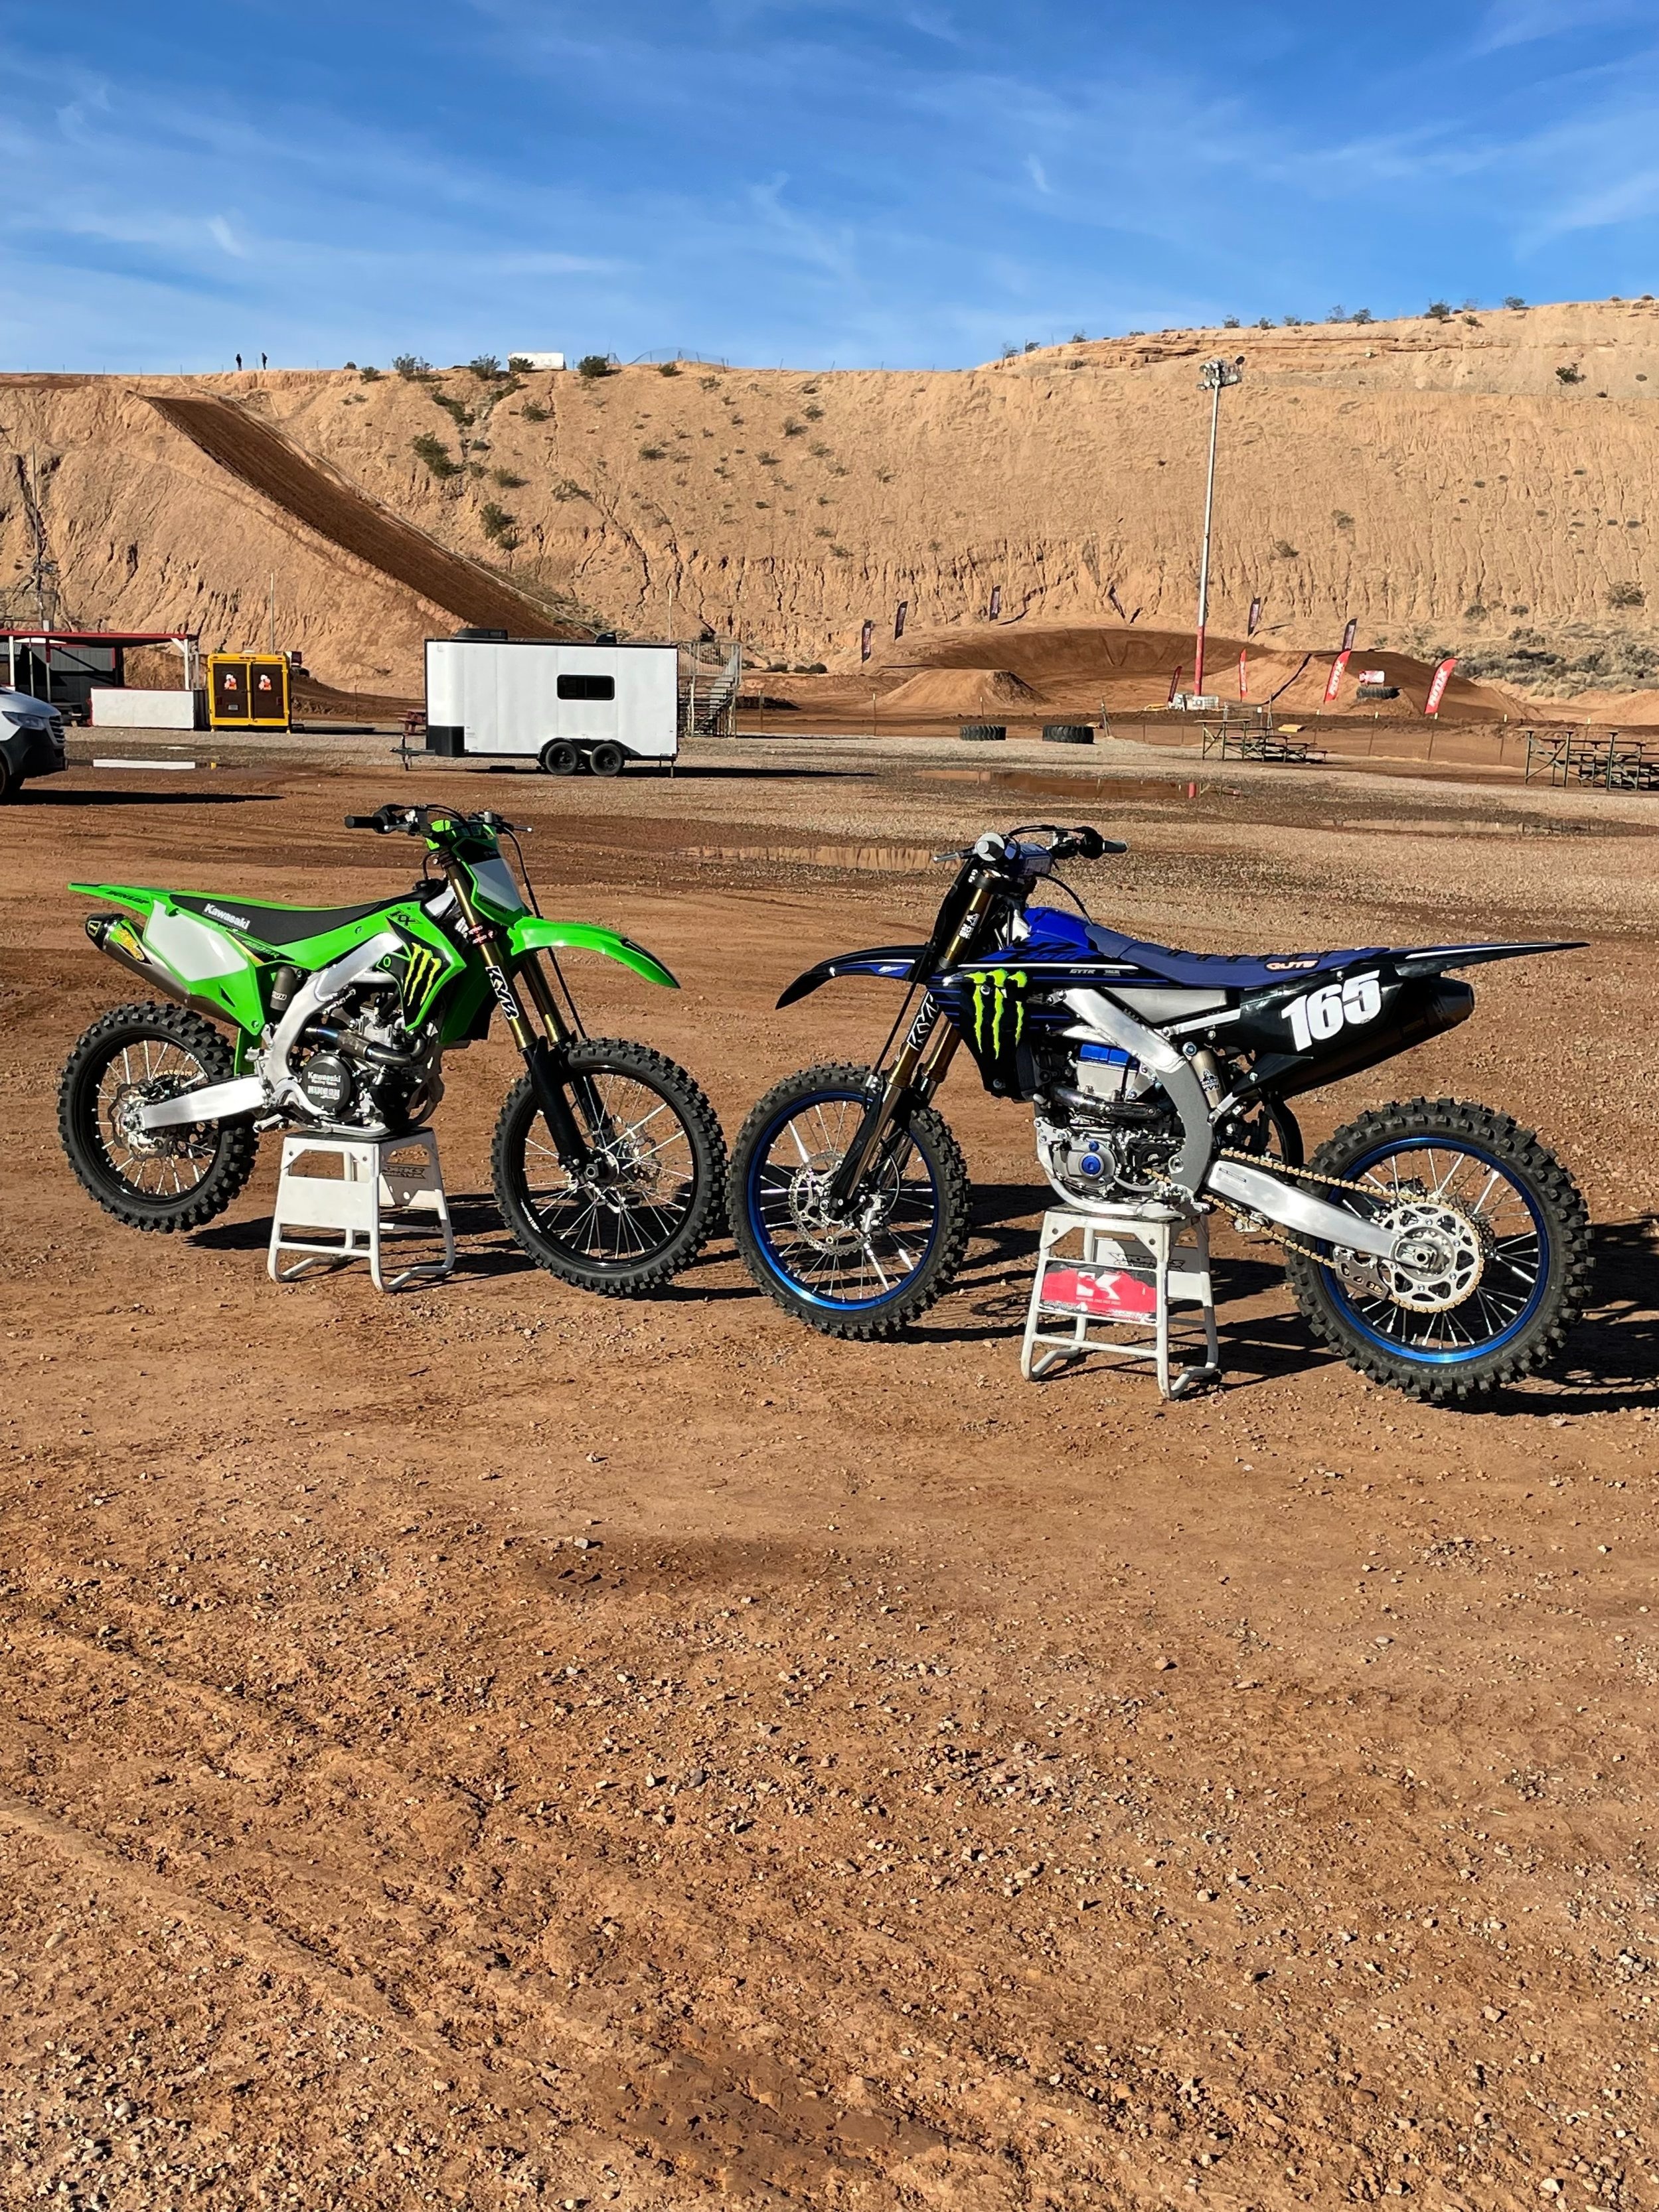  The RMATVMC Keefer Tested Podcast Presented By FXR Racing And Race Tech  KX450SR Vs. YZ450F  